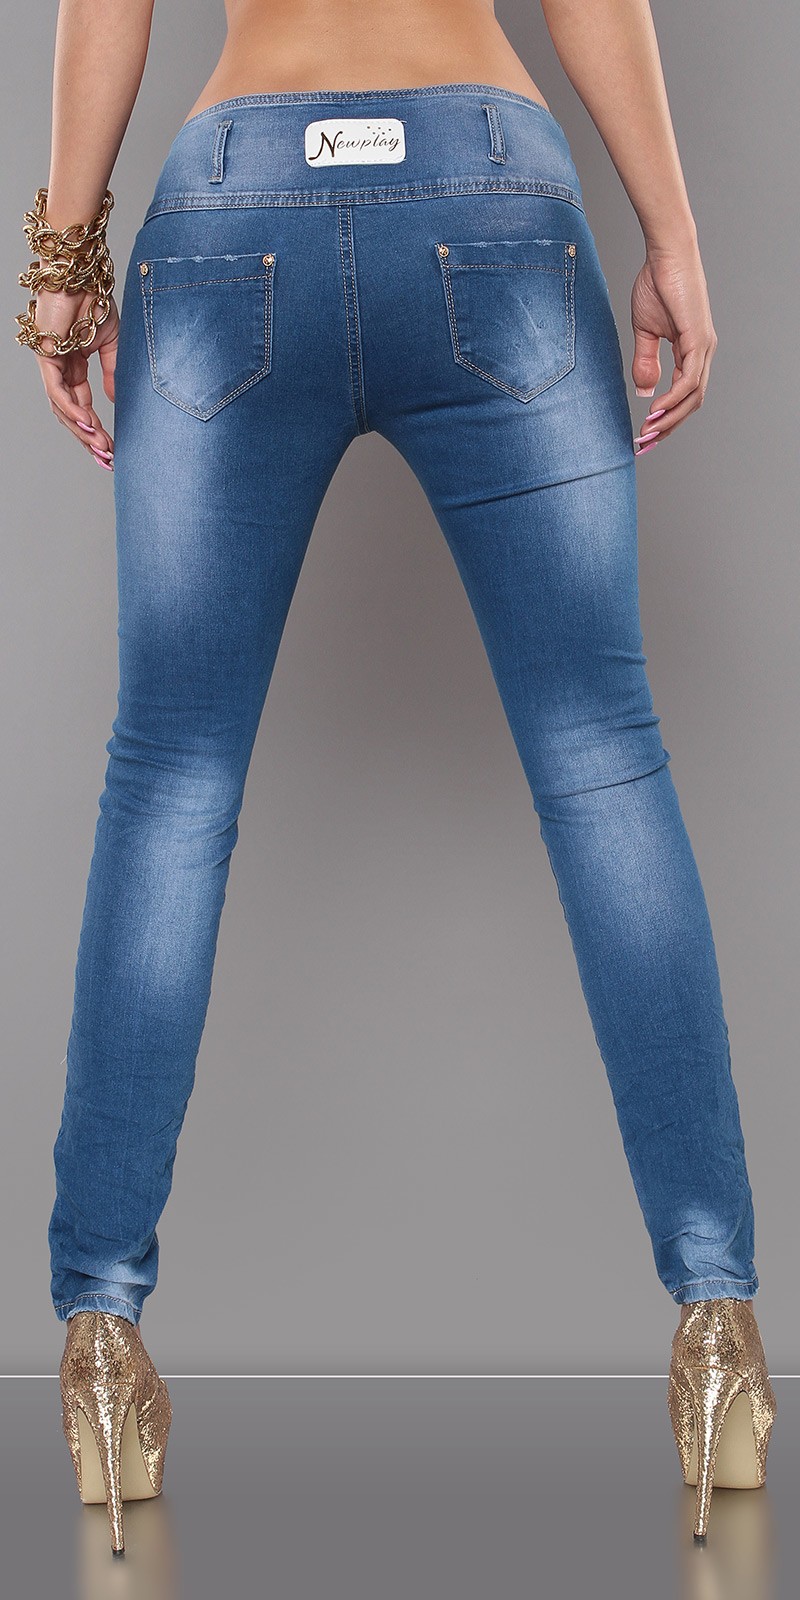 ccPcs Sexy Skinny Jeans in Used Look Color JEANSBLUE Size Lot 0000J7723 JEANSBLAU 2 1 Copy 1